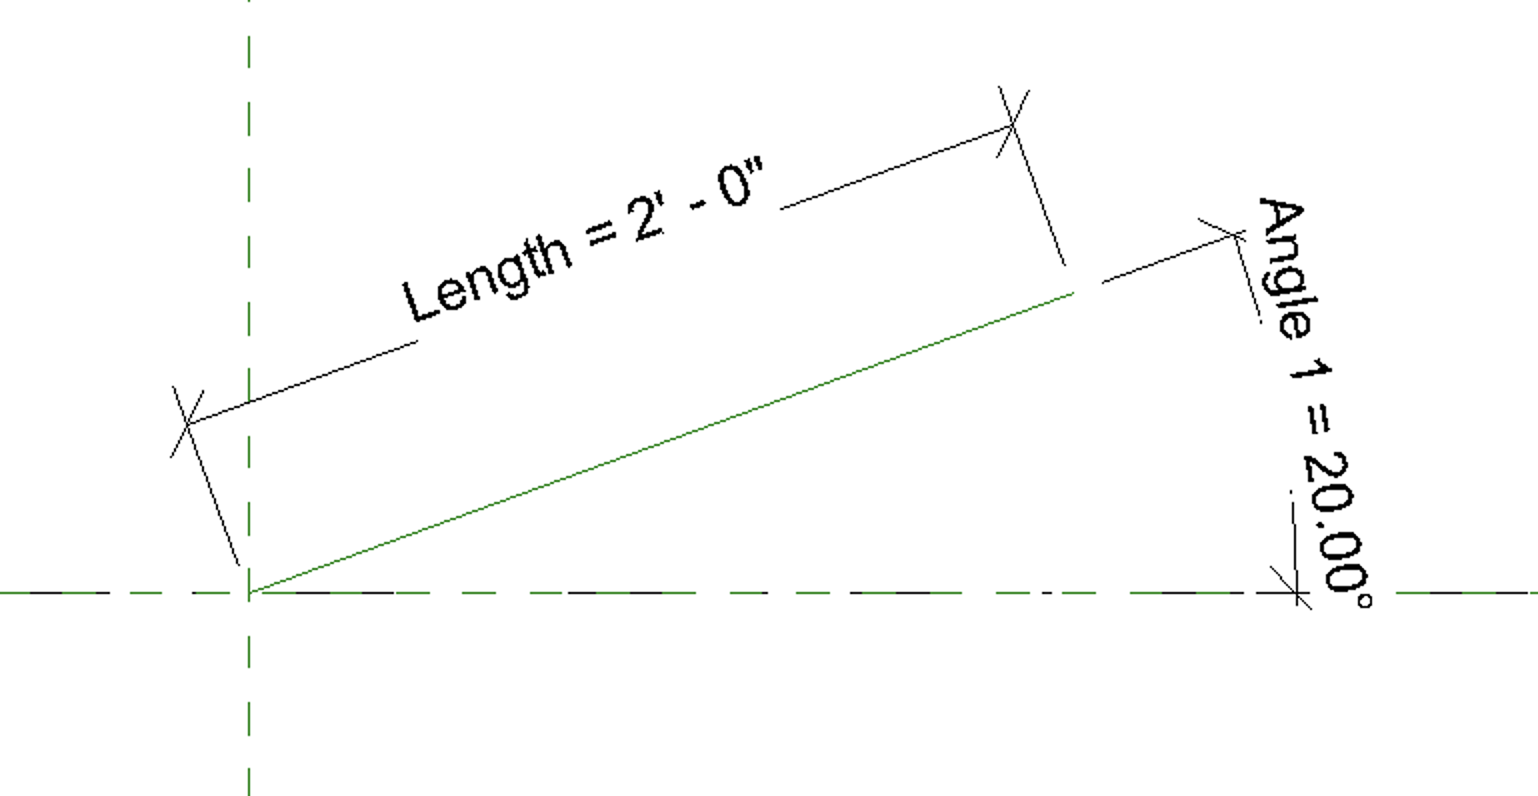 Reference line locked in position and constrained